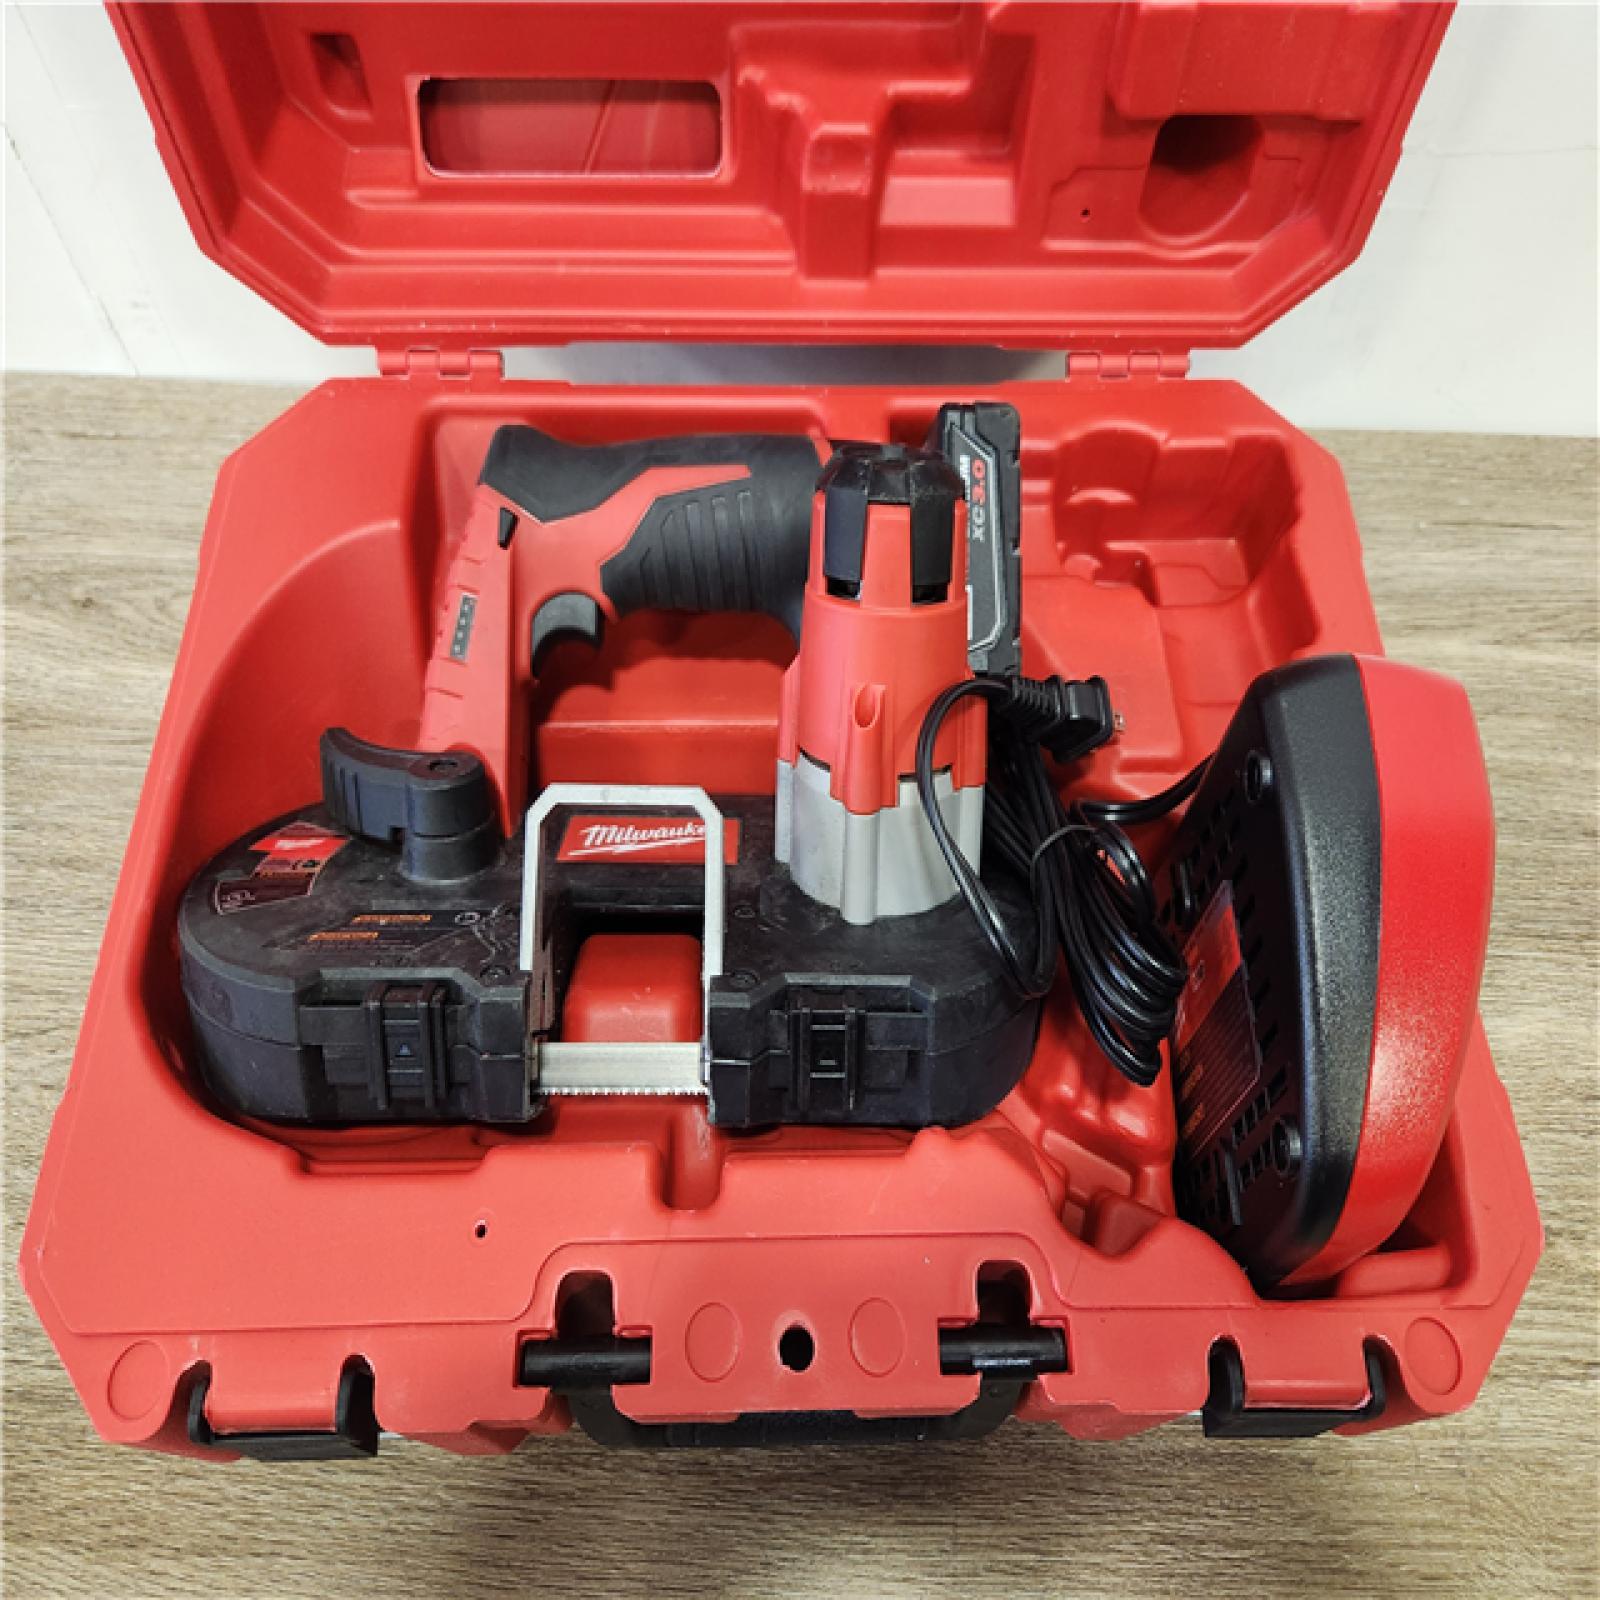 Phoenix Location NEW Milwaukee M12 12V Lithium-Ion Cordless Sub-Compact Band Saw XC Kit with One 3.0h Battery, Charger and Hard Case